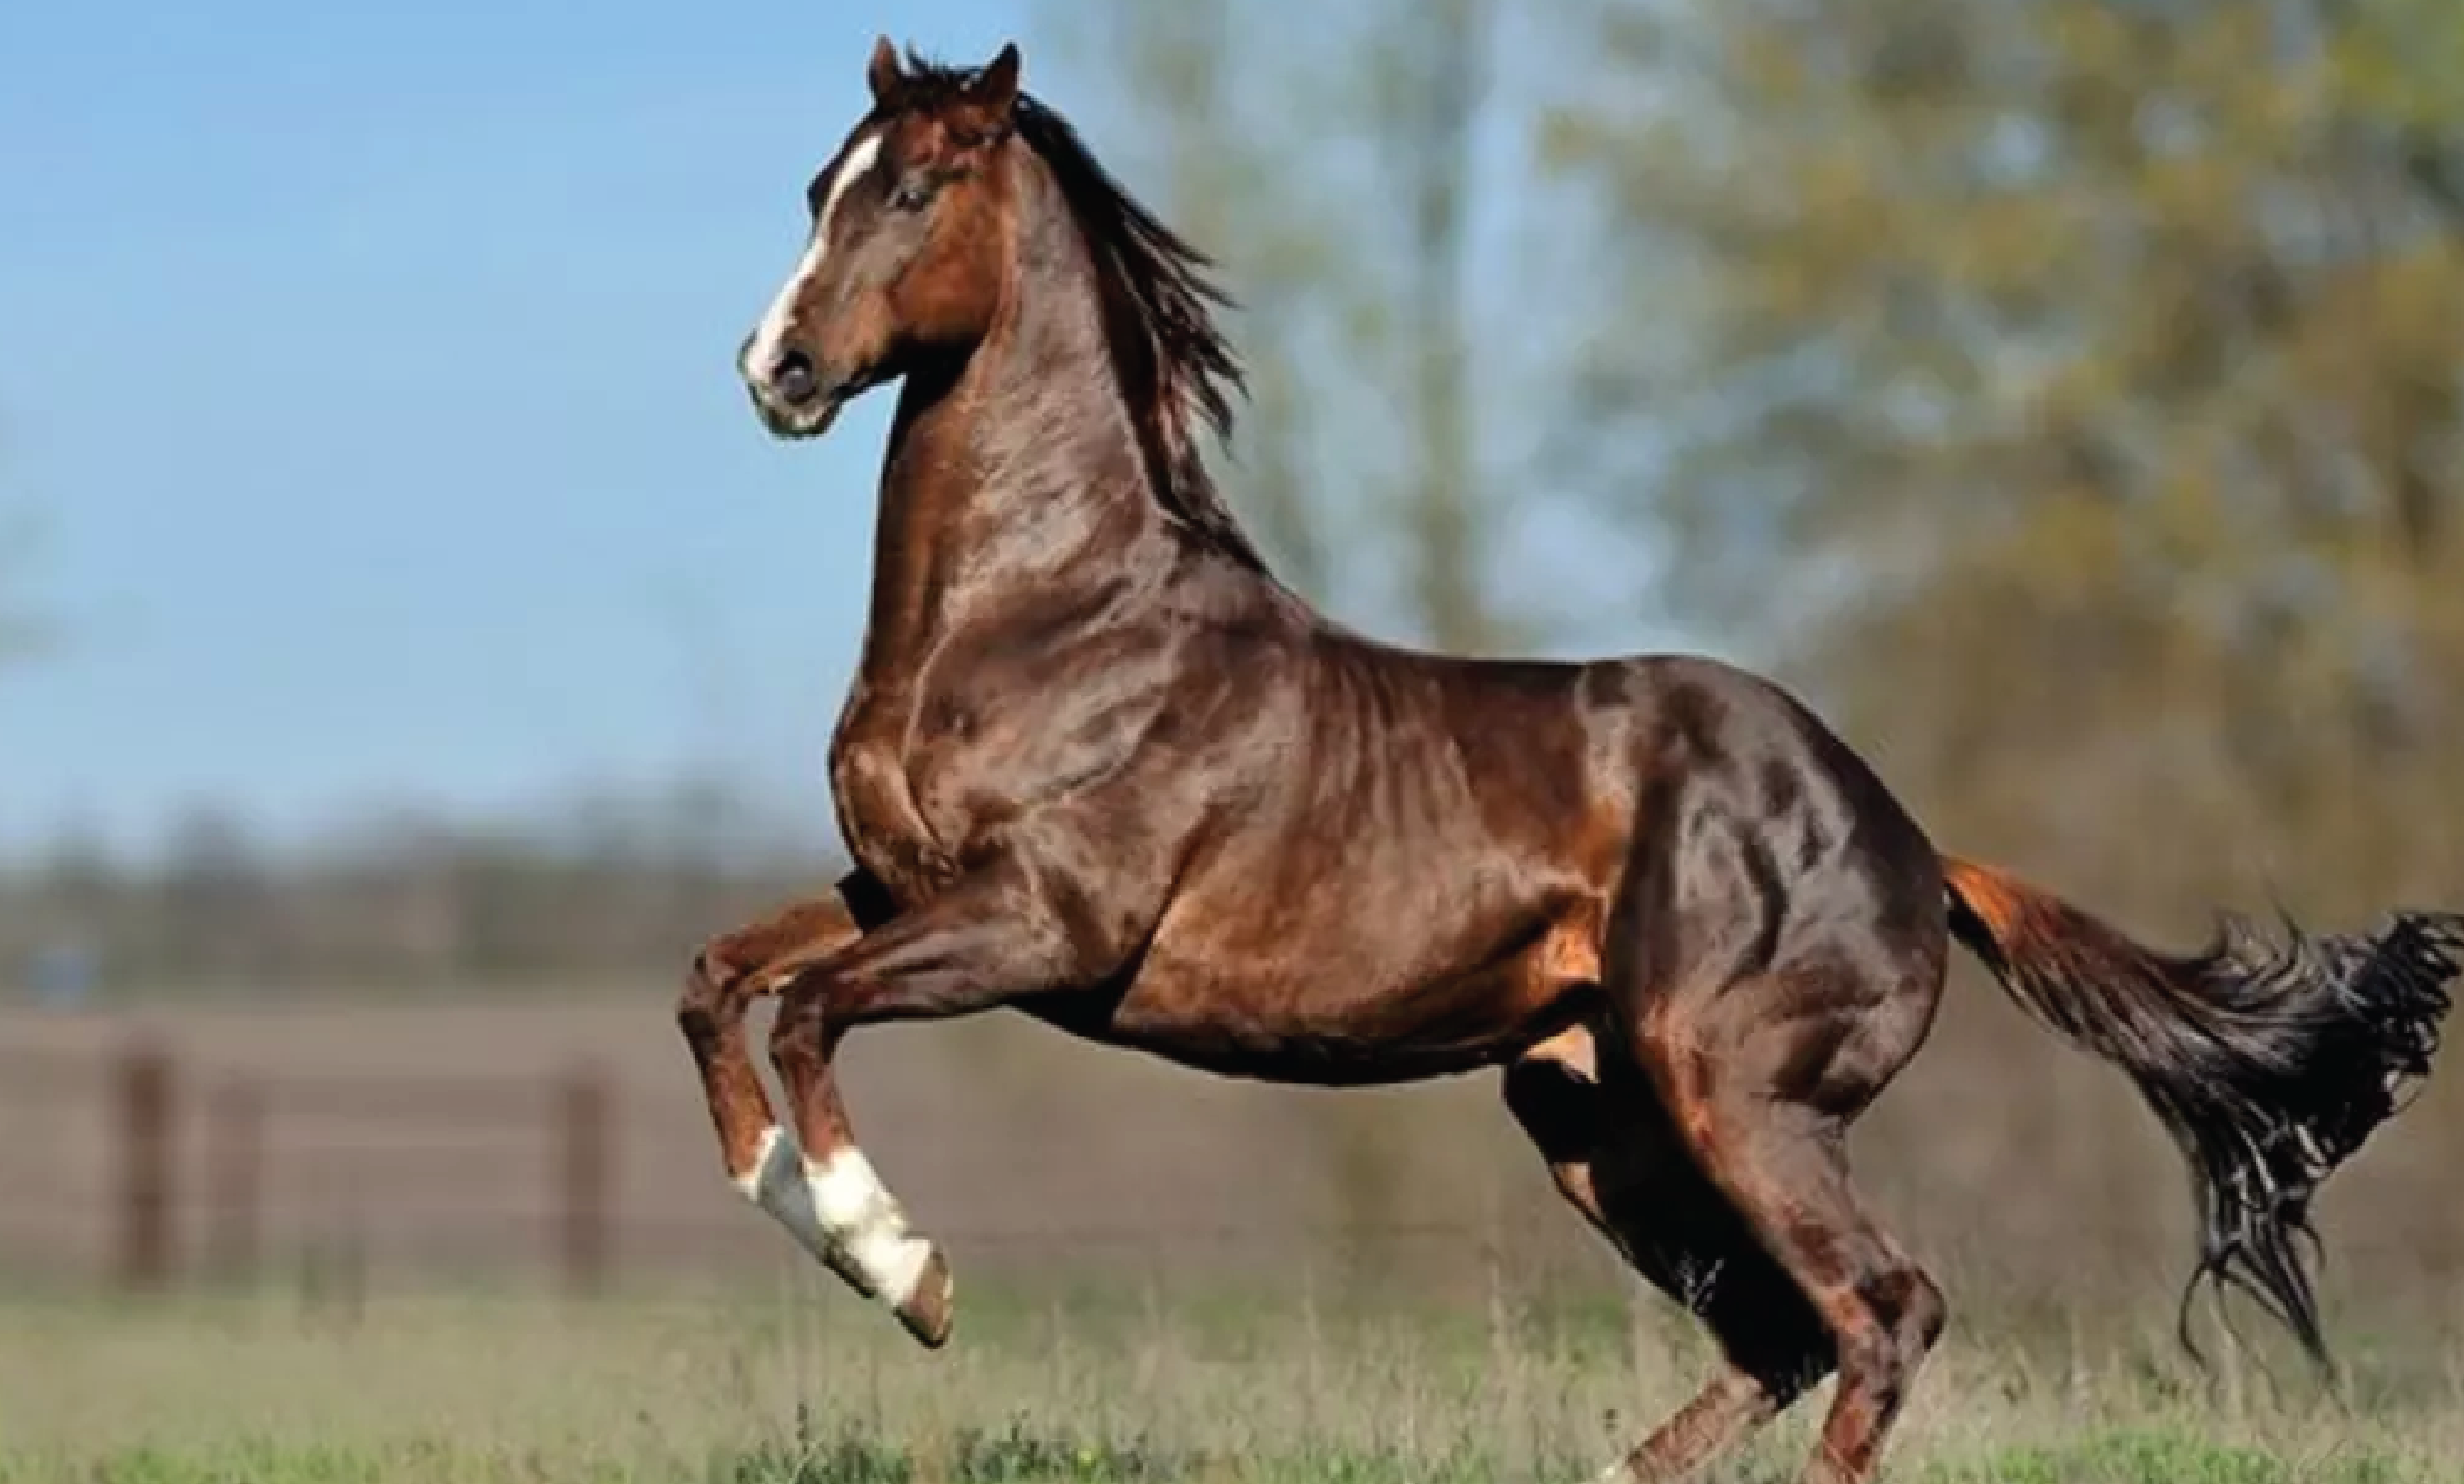 From Battles to Beauty: The Evolution of the Horse